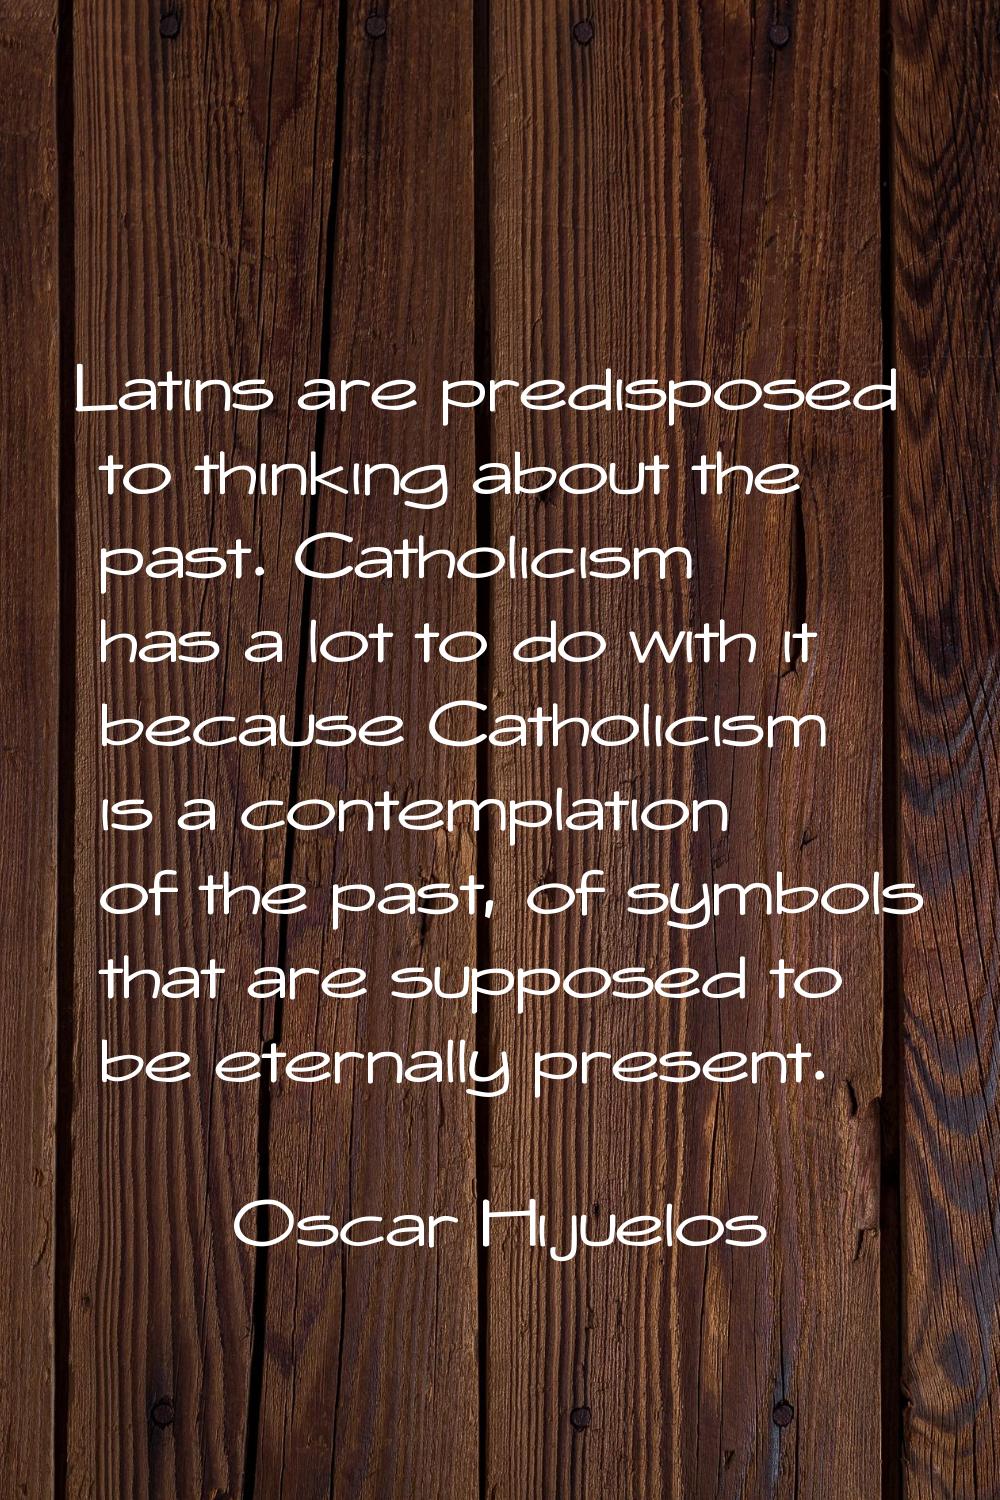 Latins are predisposed to thinking about the past. Catholicism has a lot to do with it because Cath